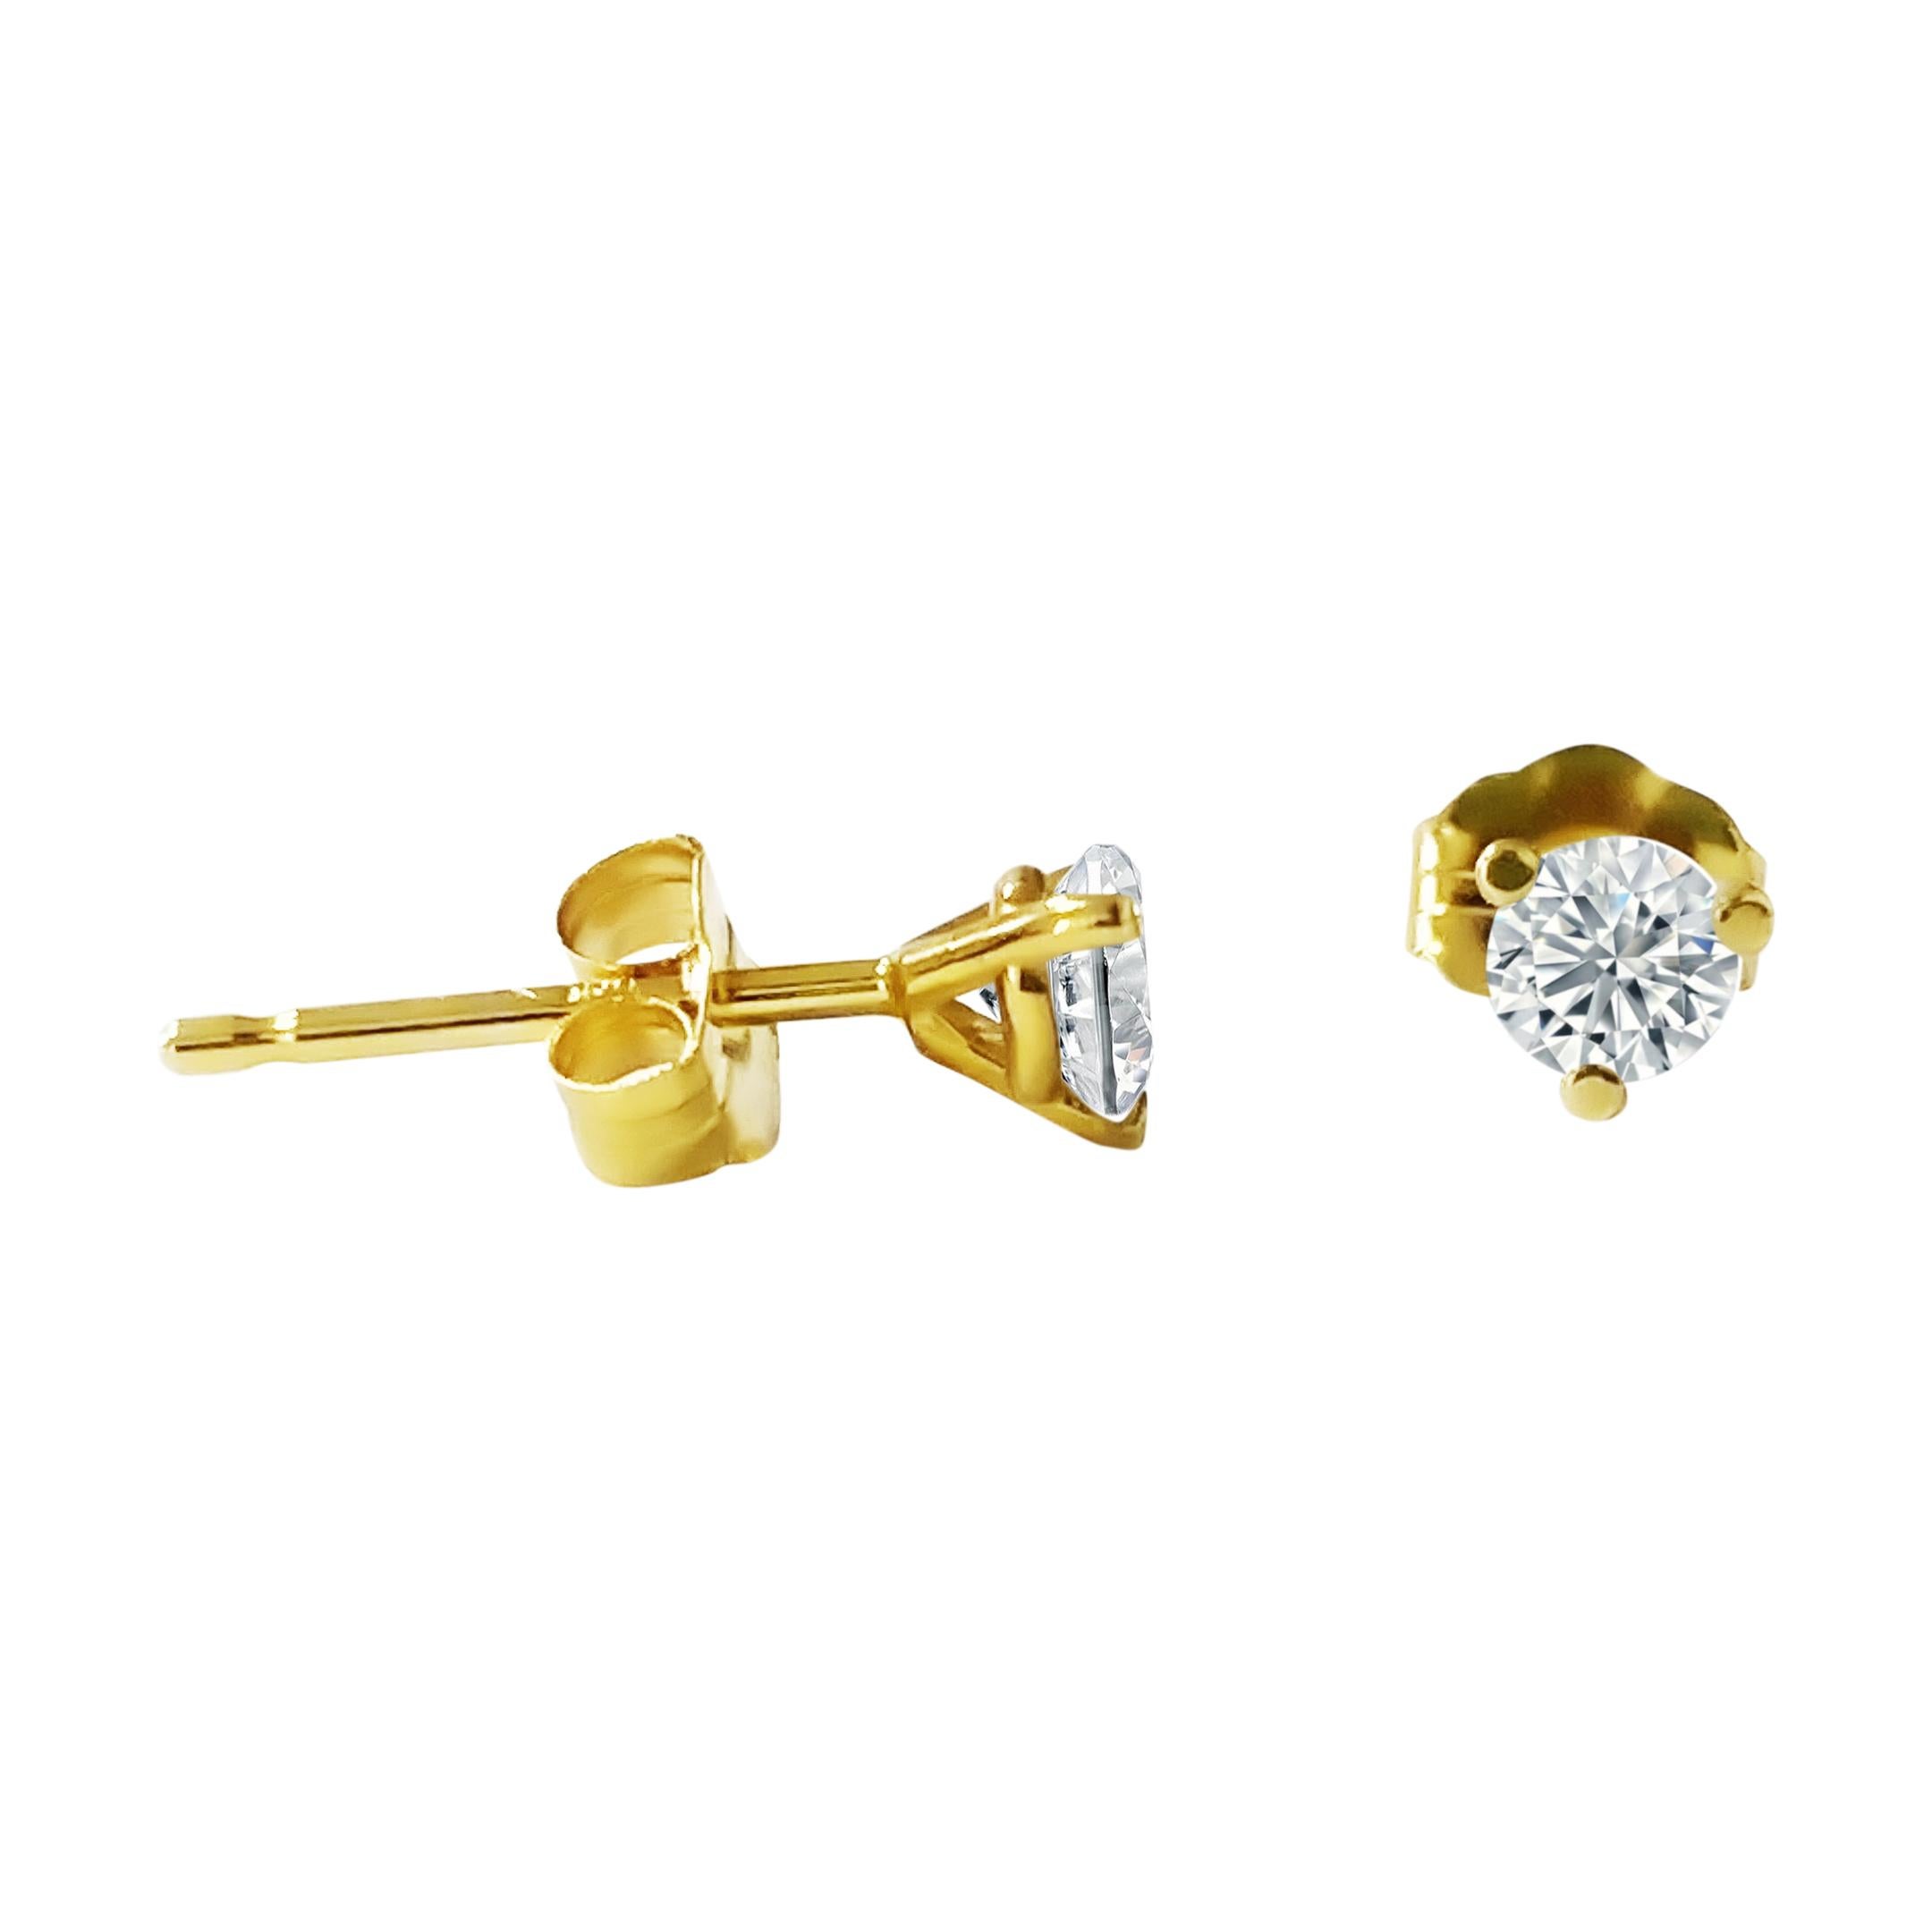 30 Carat Diamond Stud Earrings 14K Yellow Gold In Excellent Condition For Sale In Miami, FL